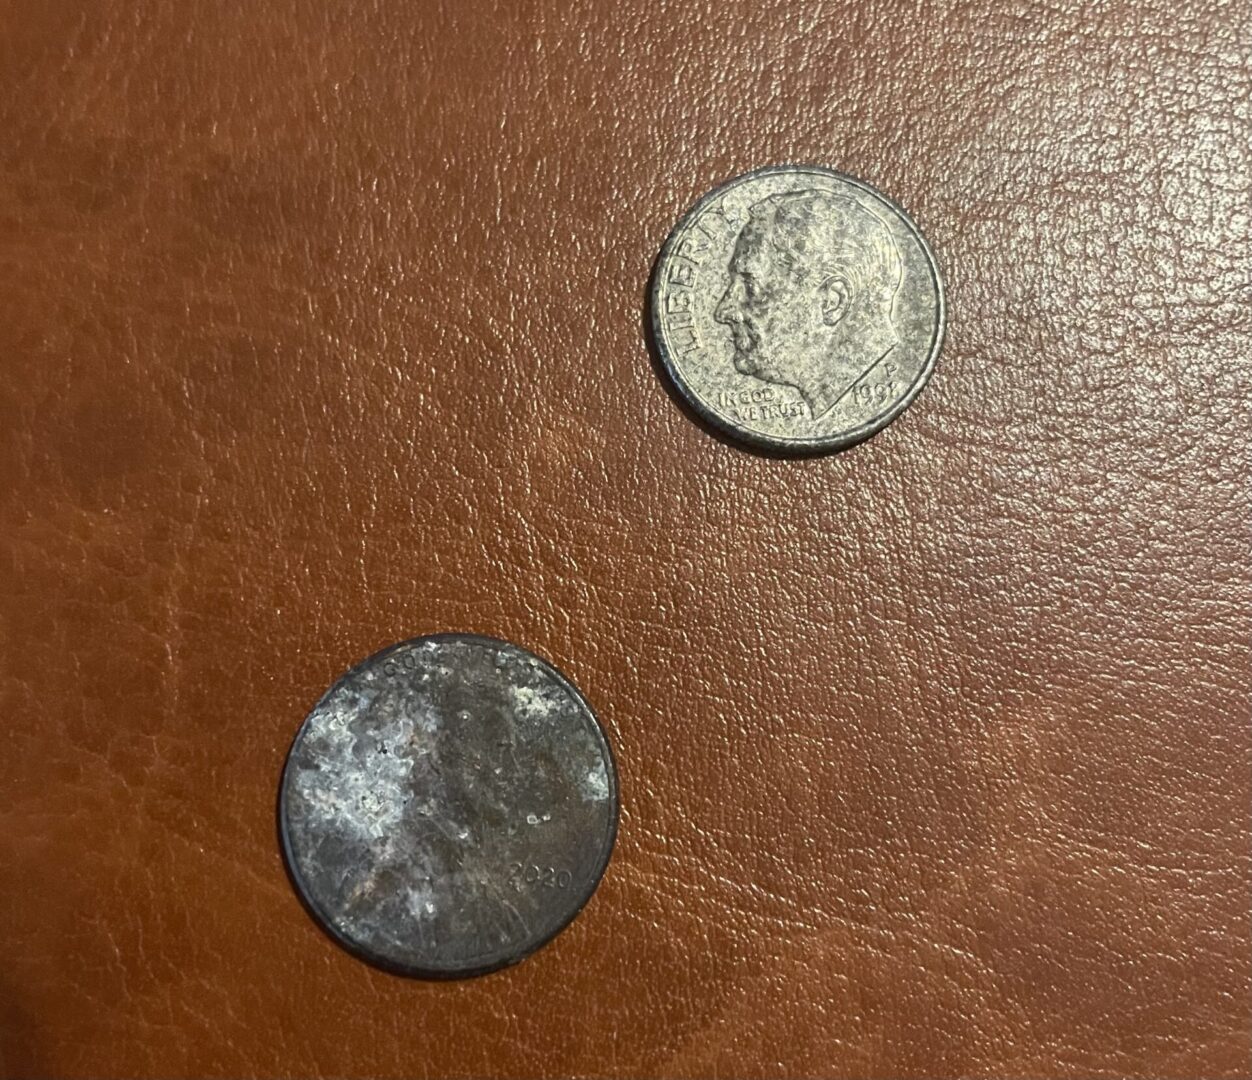 Two coins on a brown surface with one of them missing.